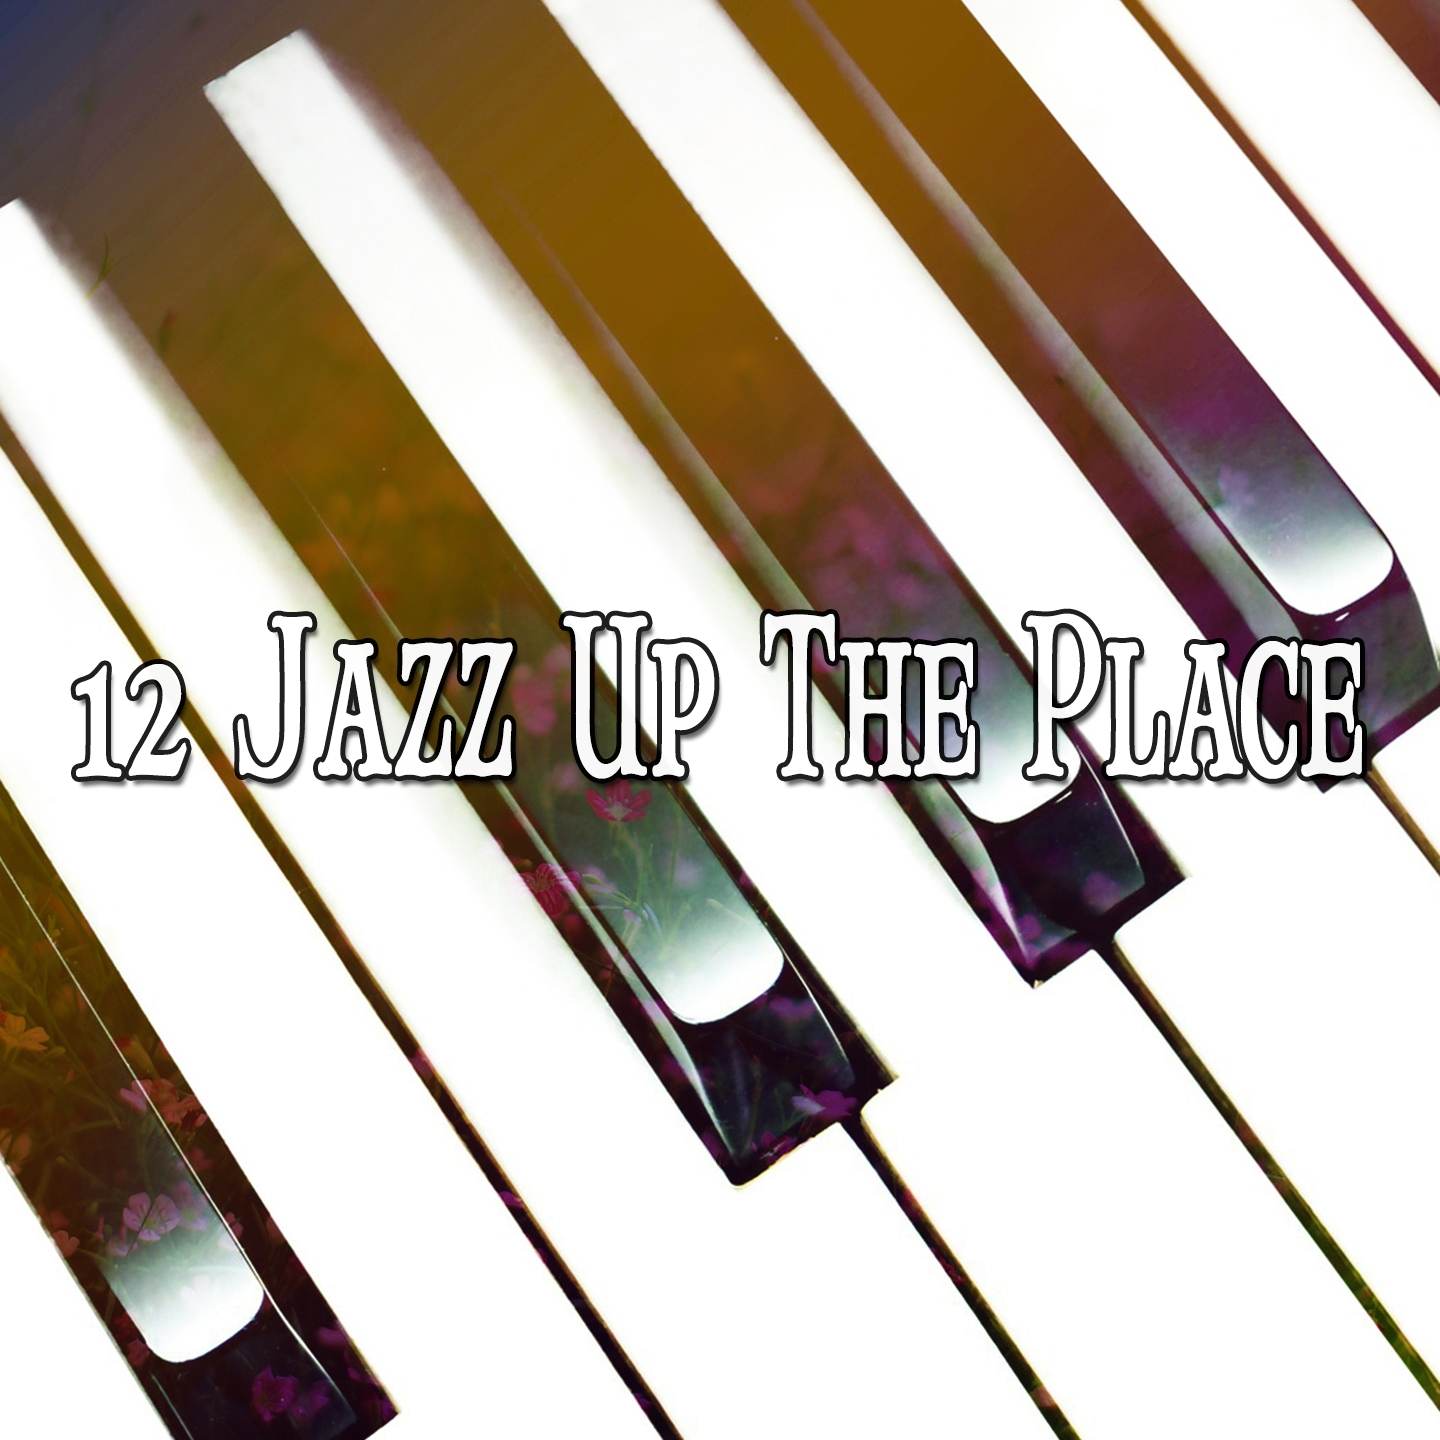 12 Jazz Up The Place